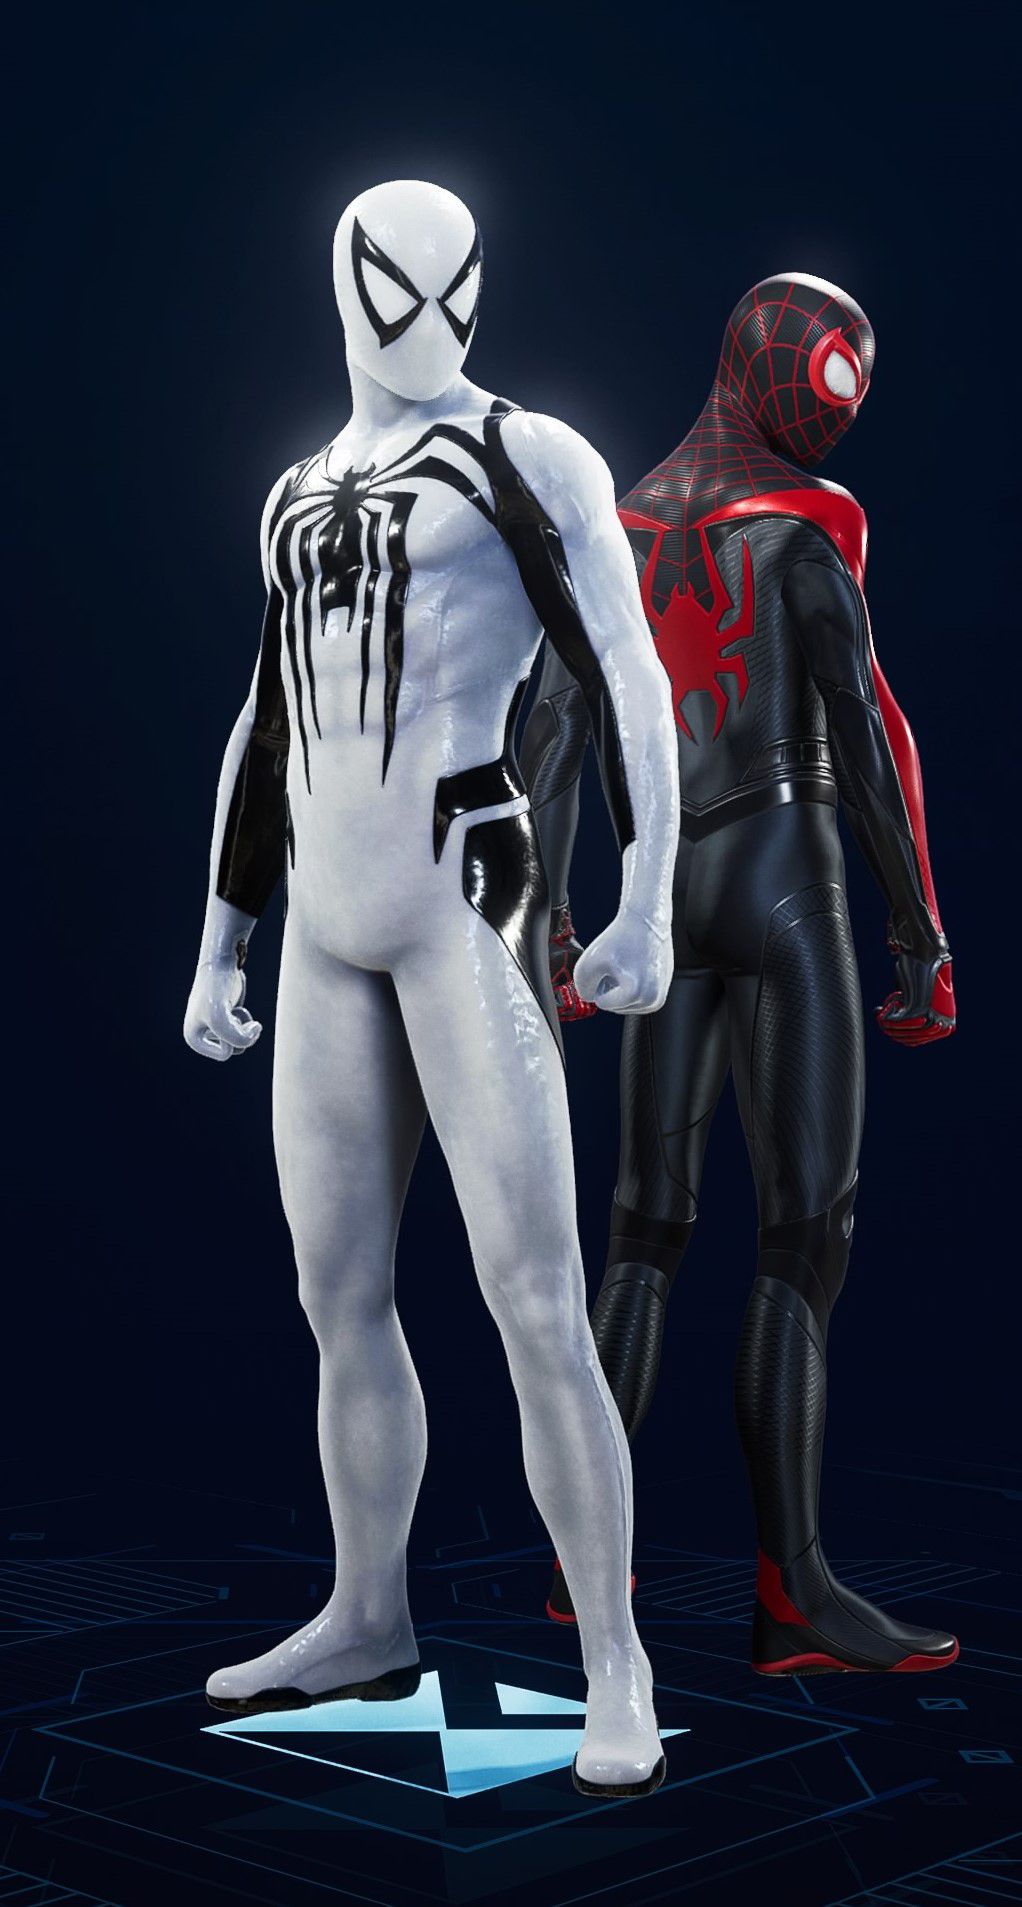 Peter Parker stands in his Anti-Venom Suit in the suit selection screen of Spider-Man 2.